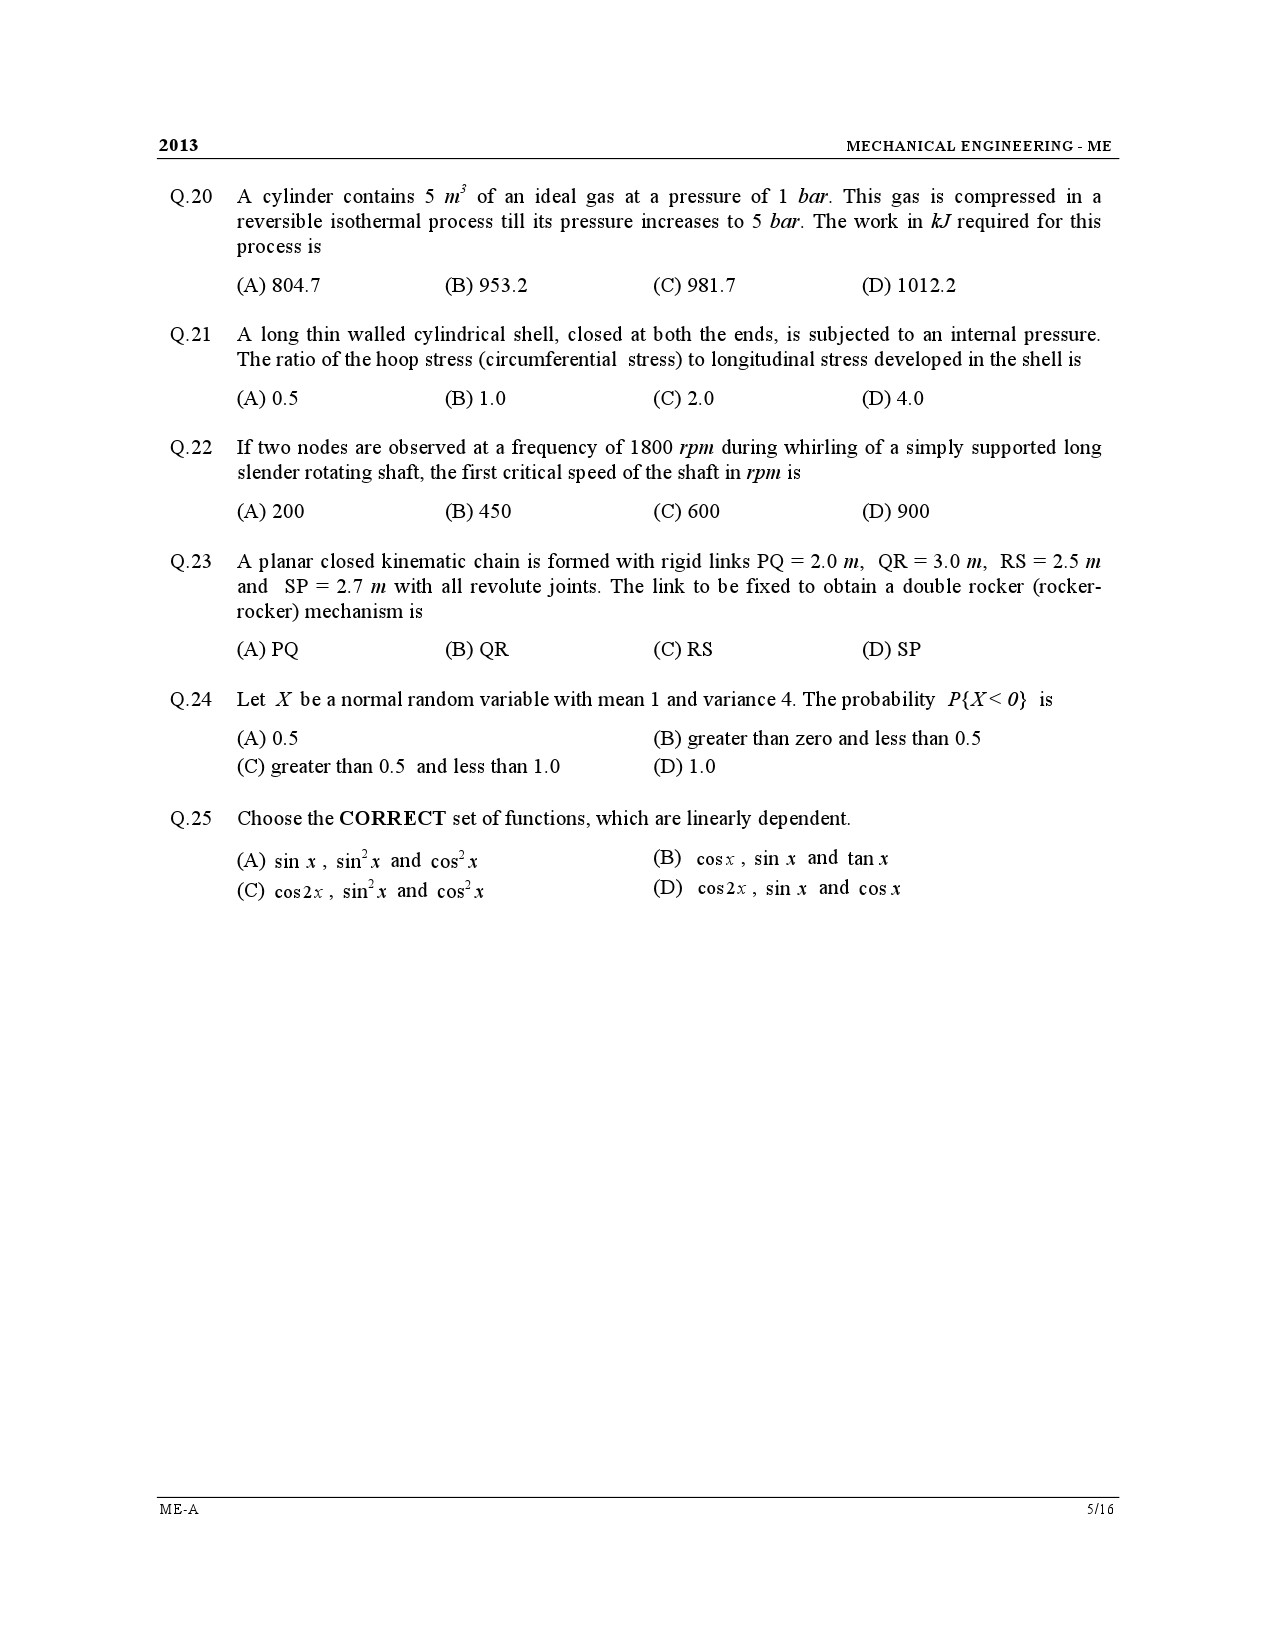 GATE Exam Question Paper 2013 Mechanical Engineering 5